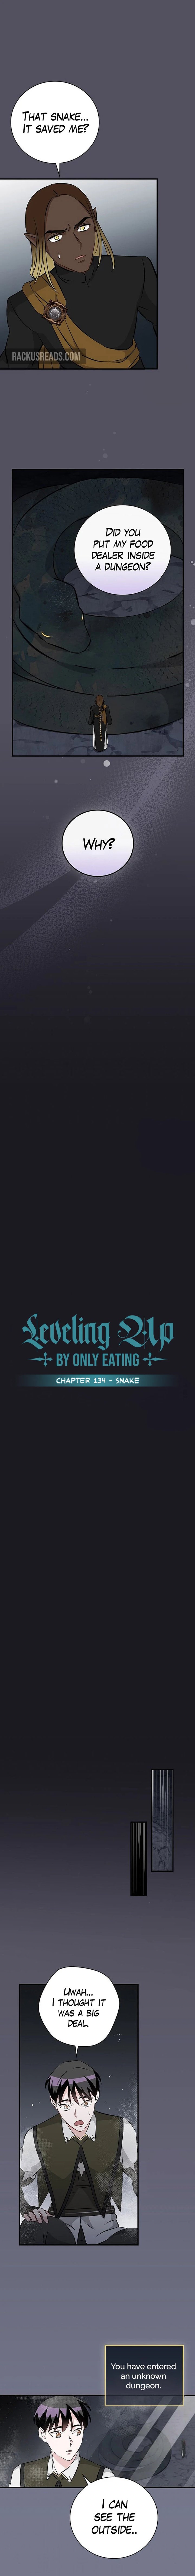 Leveling Up By Only Eating 134 5